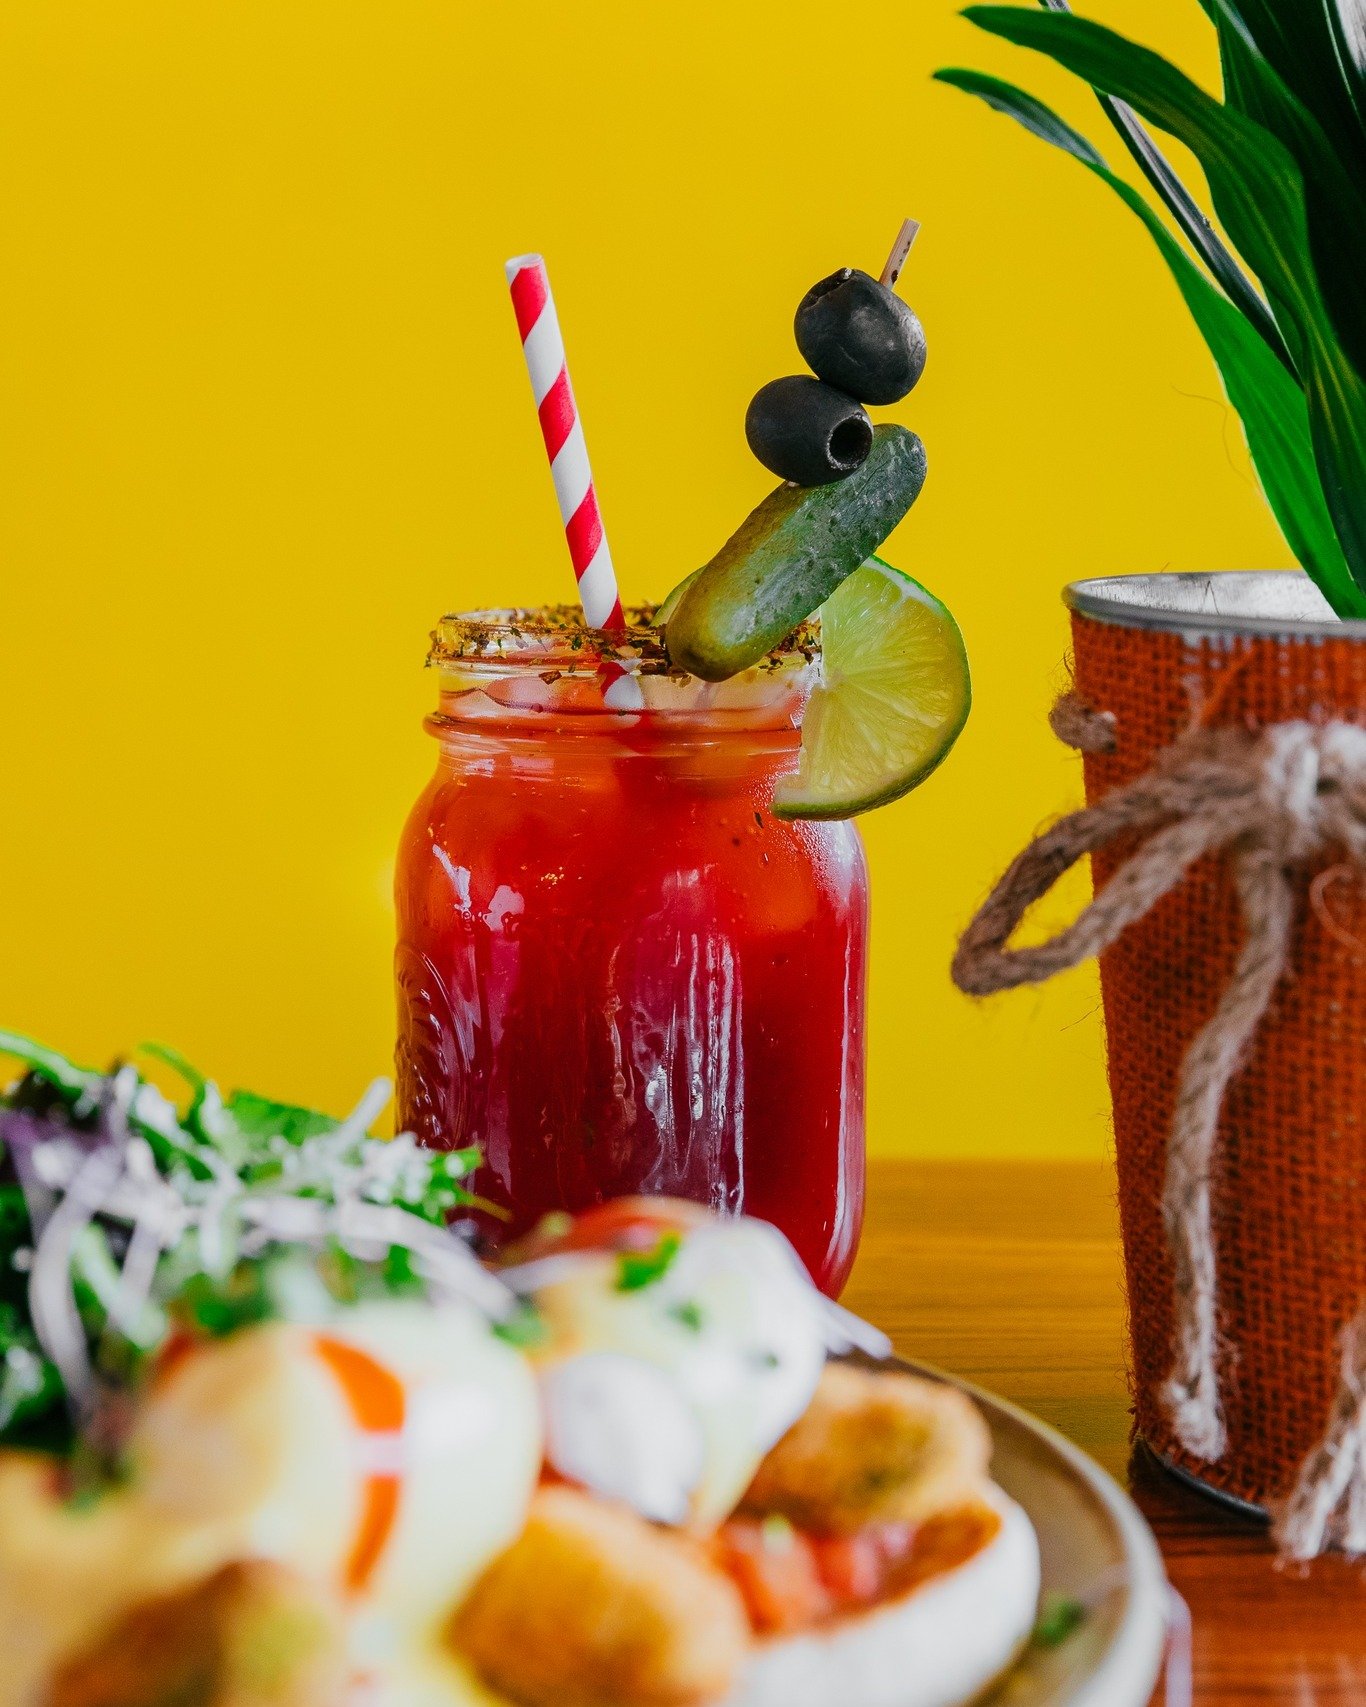 A vodka-soaked breakfast and hangover cure all-in-one. Check out our flavourful Bloody Caesar at Namo! 🌶️

This cocktail boasts a harmonious mix of spicy, salty, and savoury flavours. Don't miss the bold tomato and hot sauce undertones that add an e